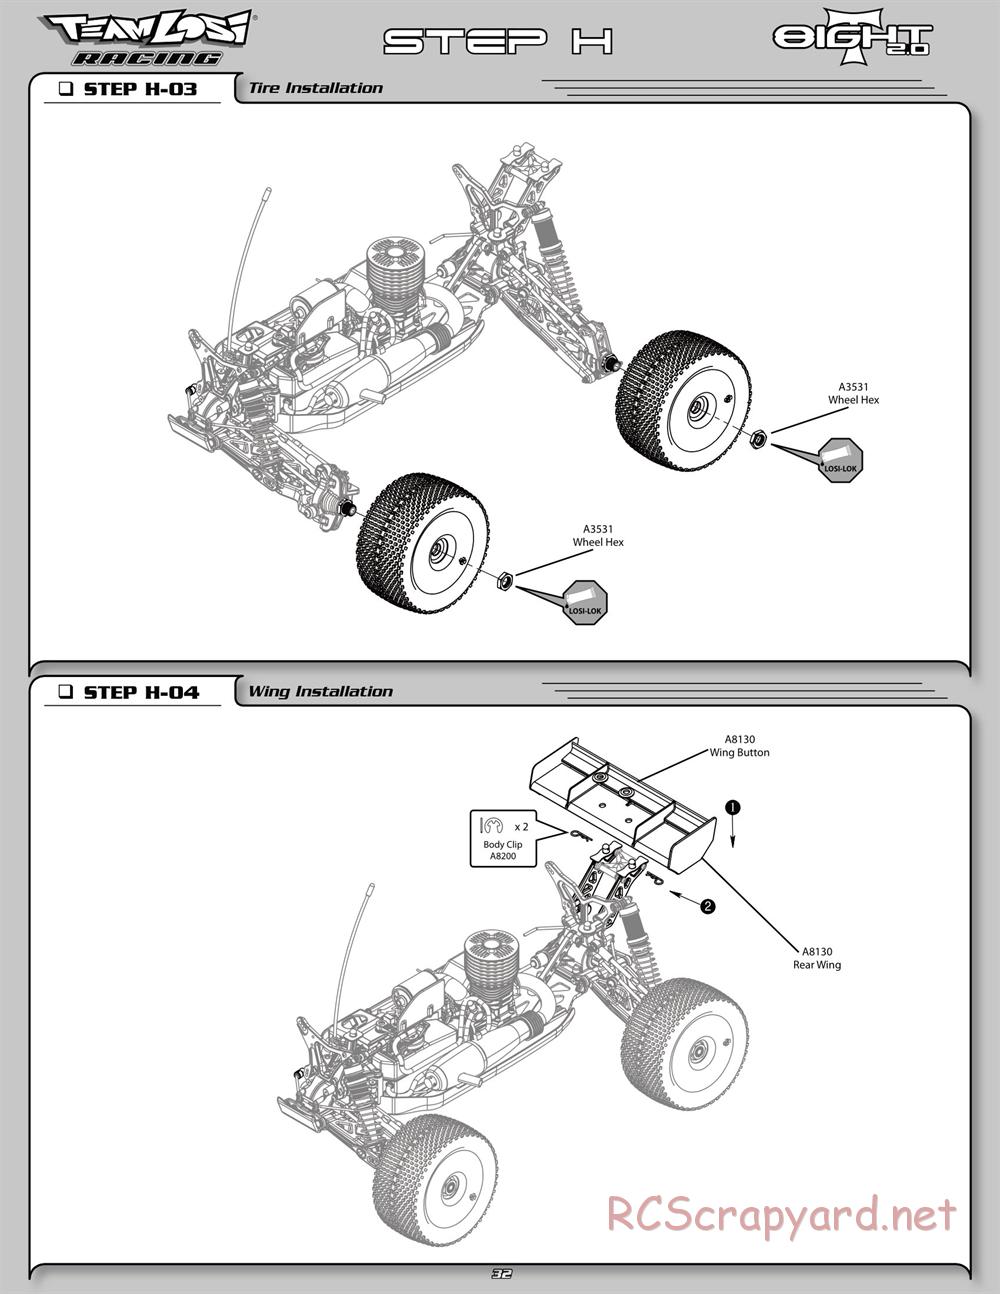 Team Losi - 8ight-T 2.0 Race Roller - Manual - Page 37